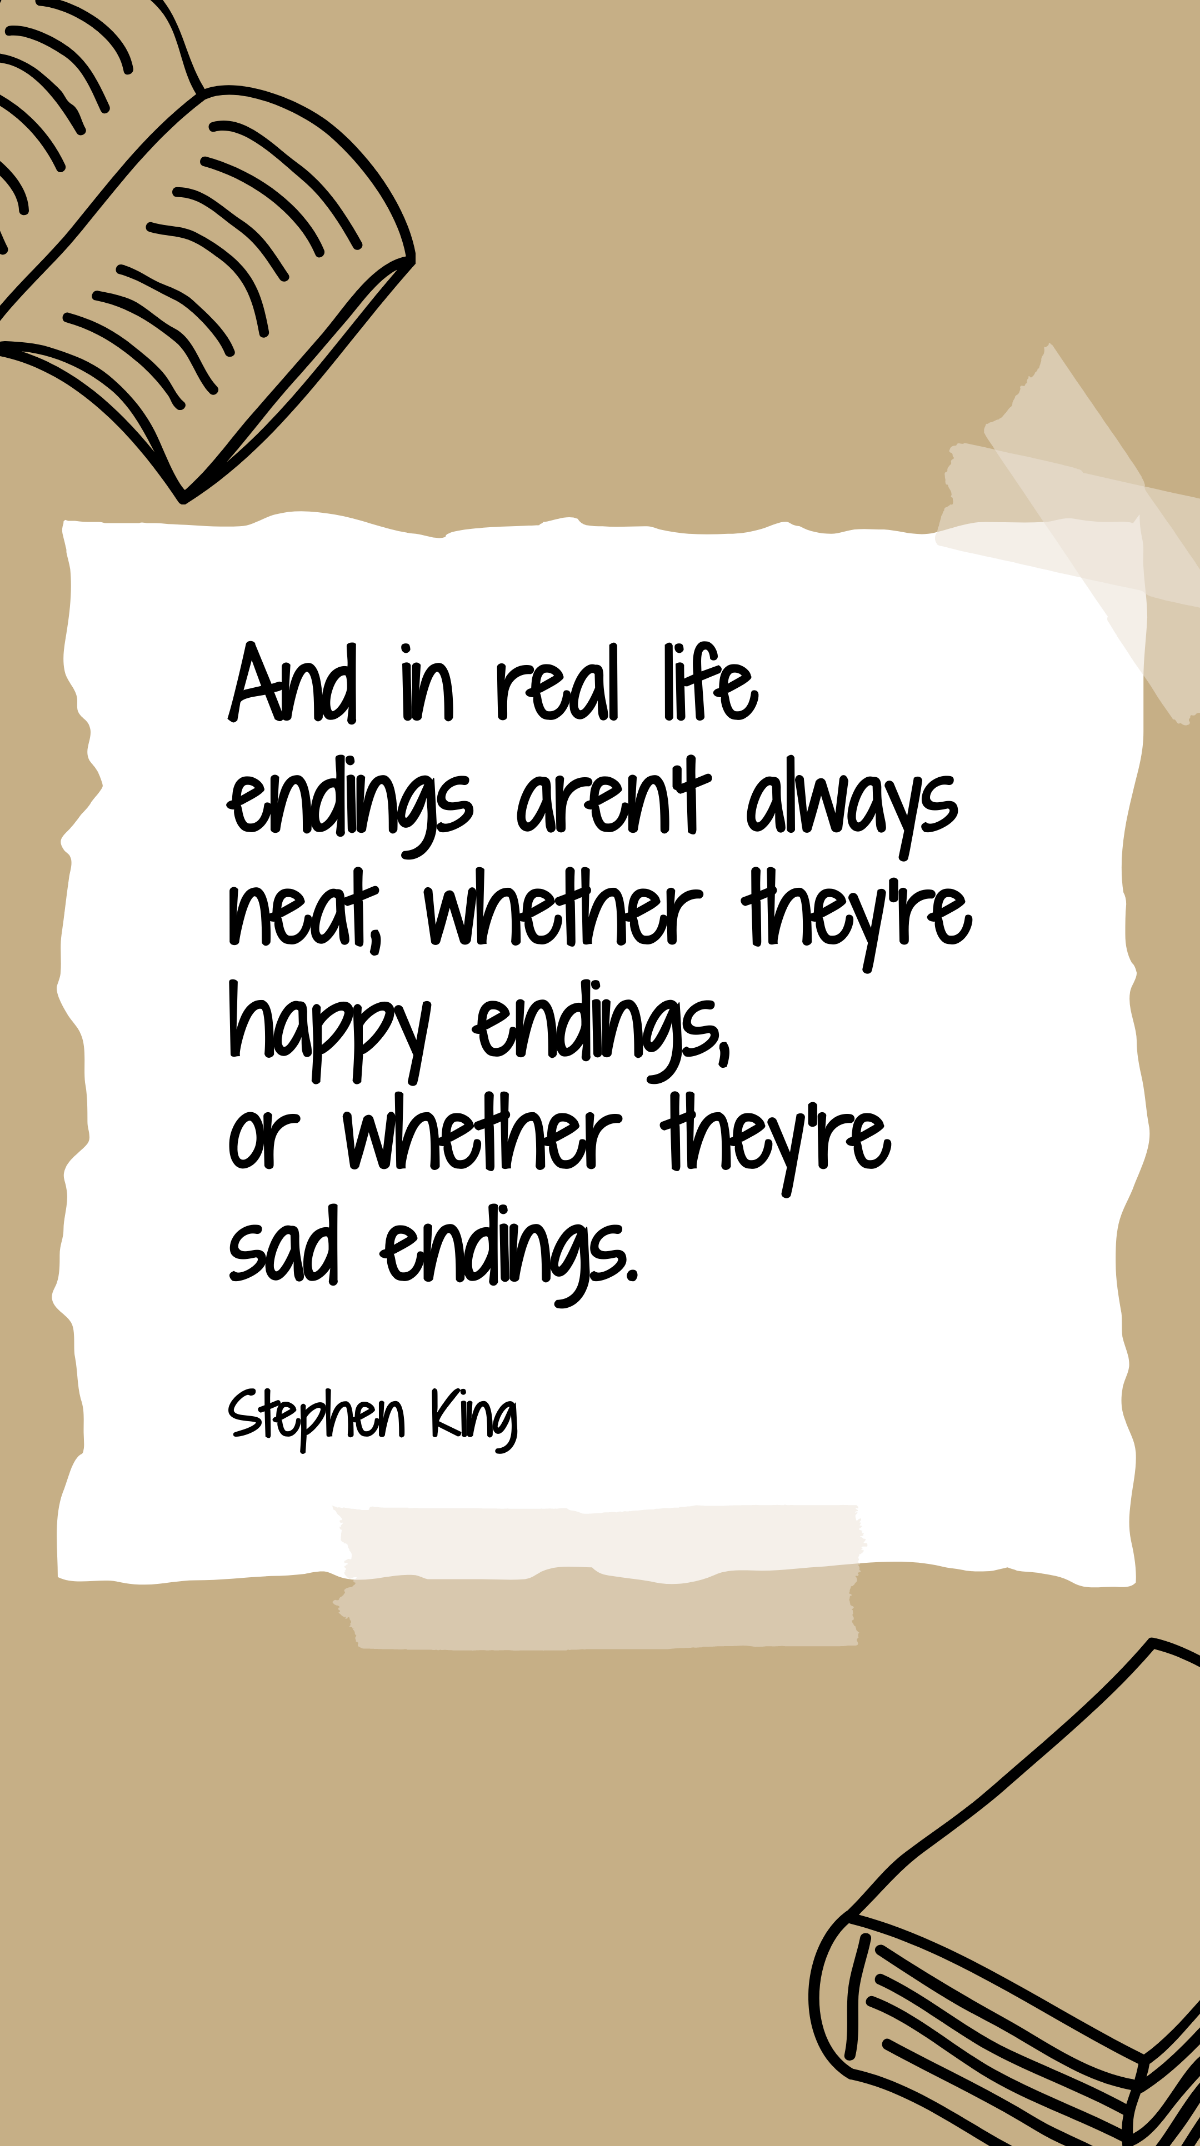 Stephen King - And in real life endings aren't always neat, whether they're happy endings, or whether they're sad endings. Template